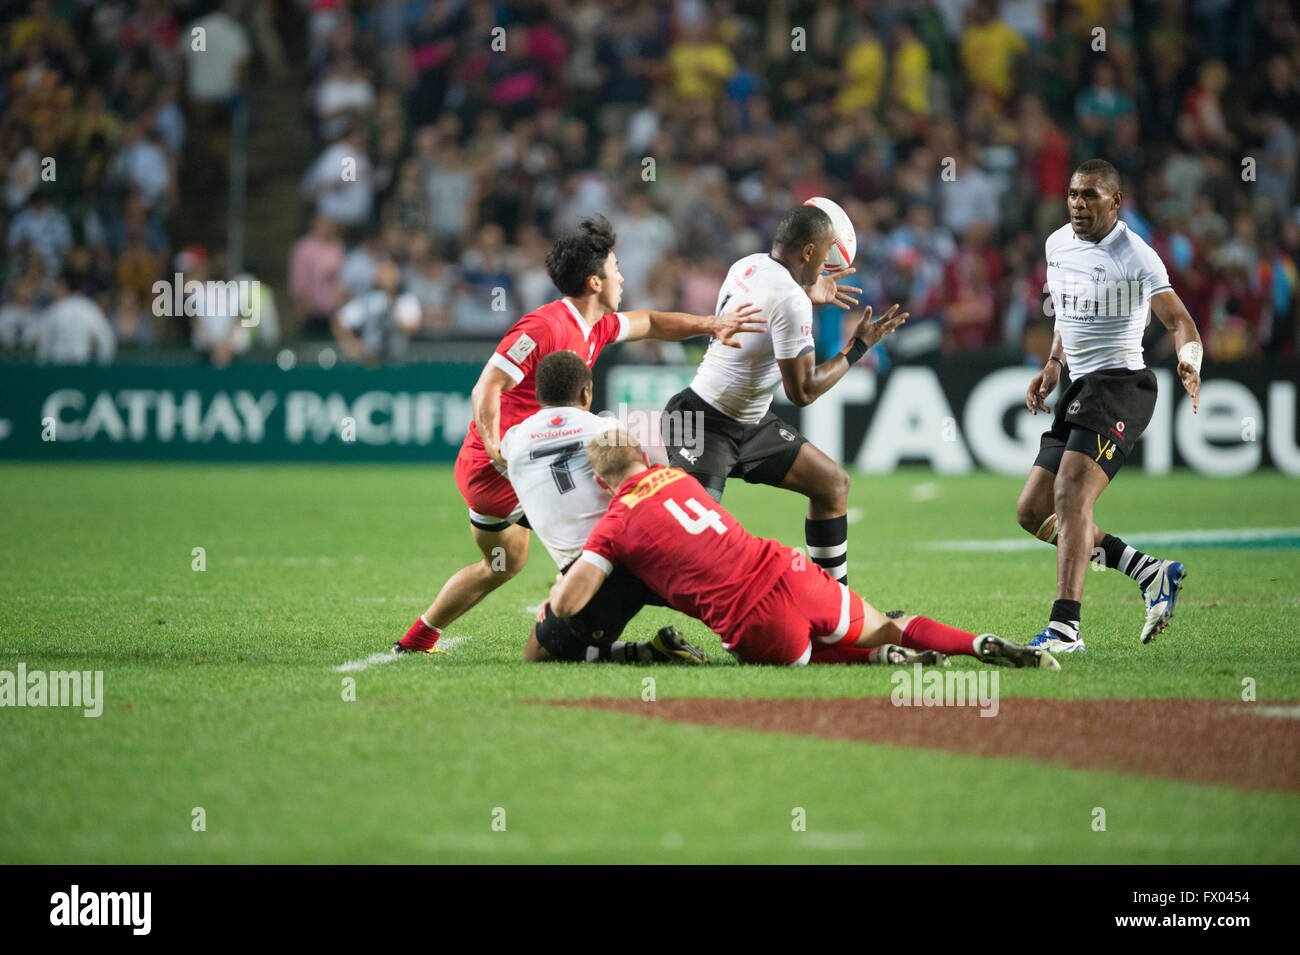 Hong Kong, China. 8, April, 2016. HSBC World Rugby Sevens Series-round 7, Hong Kong Stadium.  Canada (red) vs Fiji in the opening rounds. Fiji wins 19-17. Credit:  Gerry Rousseau/Alamy Live News Stock Photo